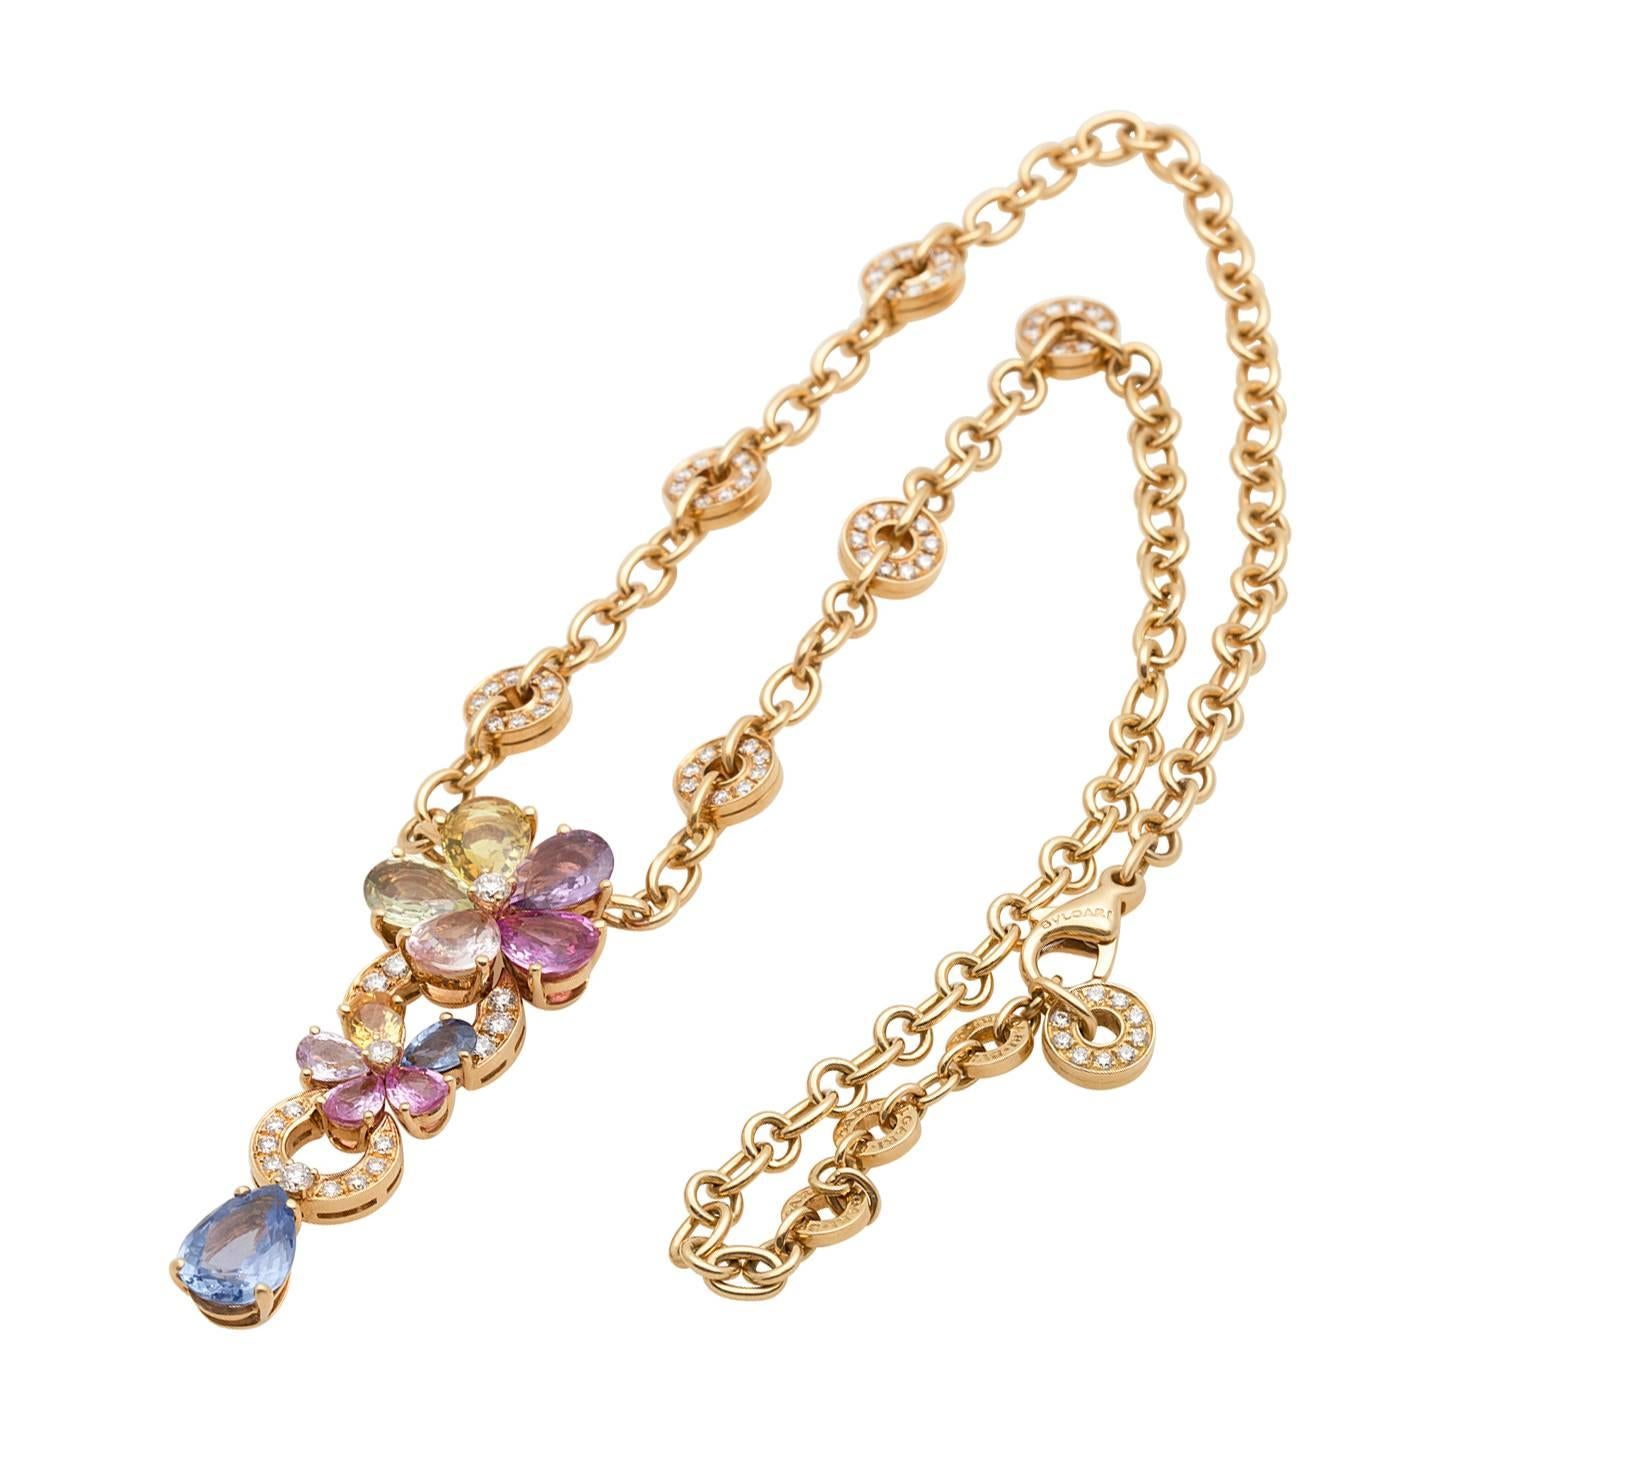  BVLGARI Multi-Color Sapphire and Diamond Flower Necklace in 18K Yellow Gold. Total Diamond Weight: 2.15ct, Total Sapphire Weight: 11.00ct, Necklace Weight: 36.2g, Necklace Length: 17.00 inches, Pendant Drop 1.875 inches, Signed: